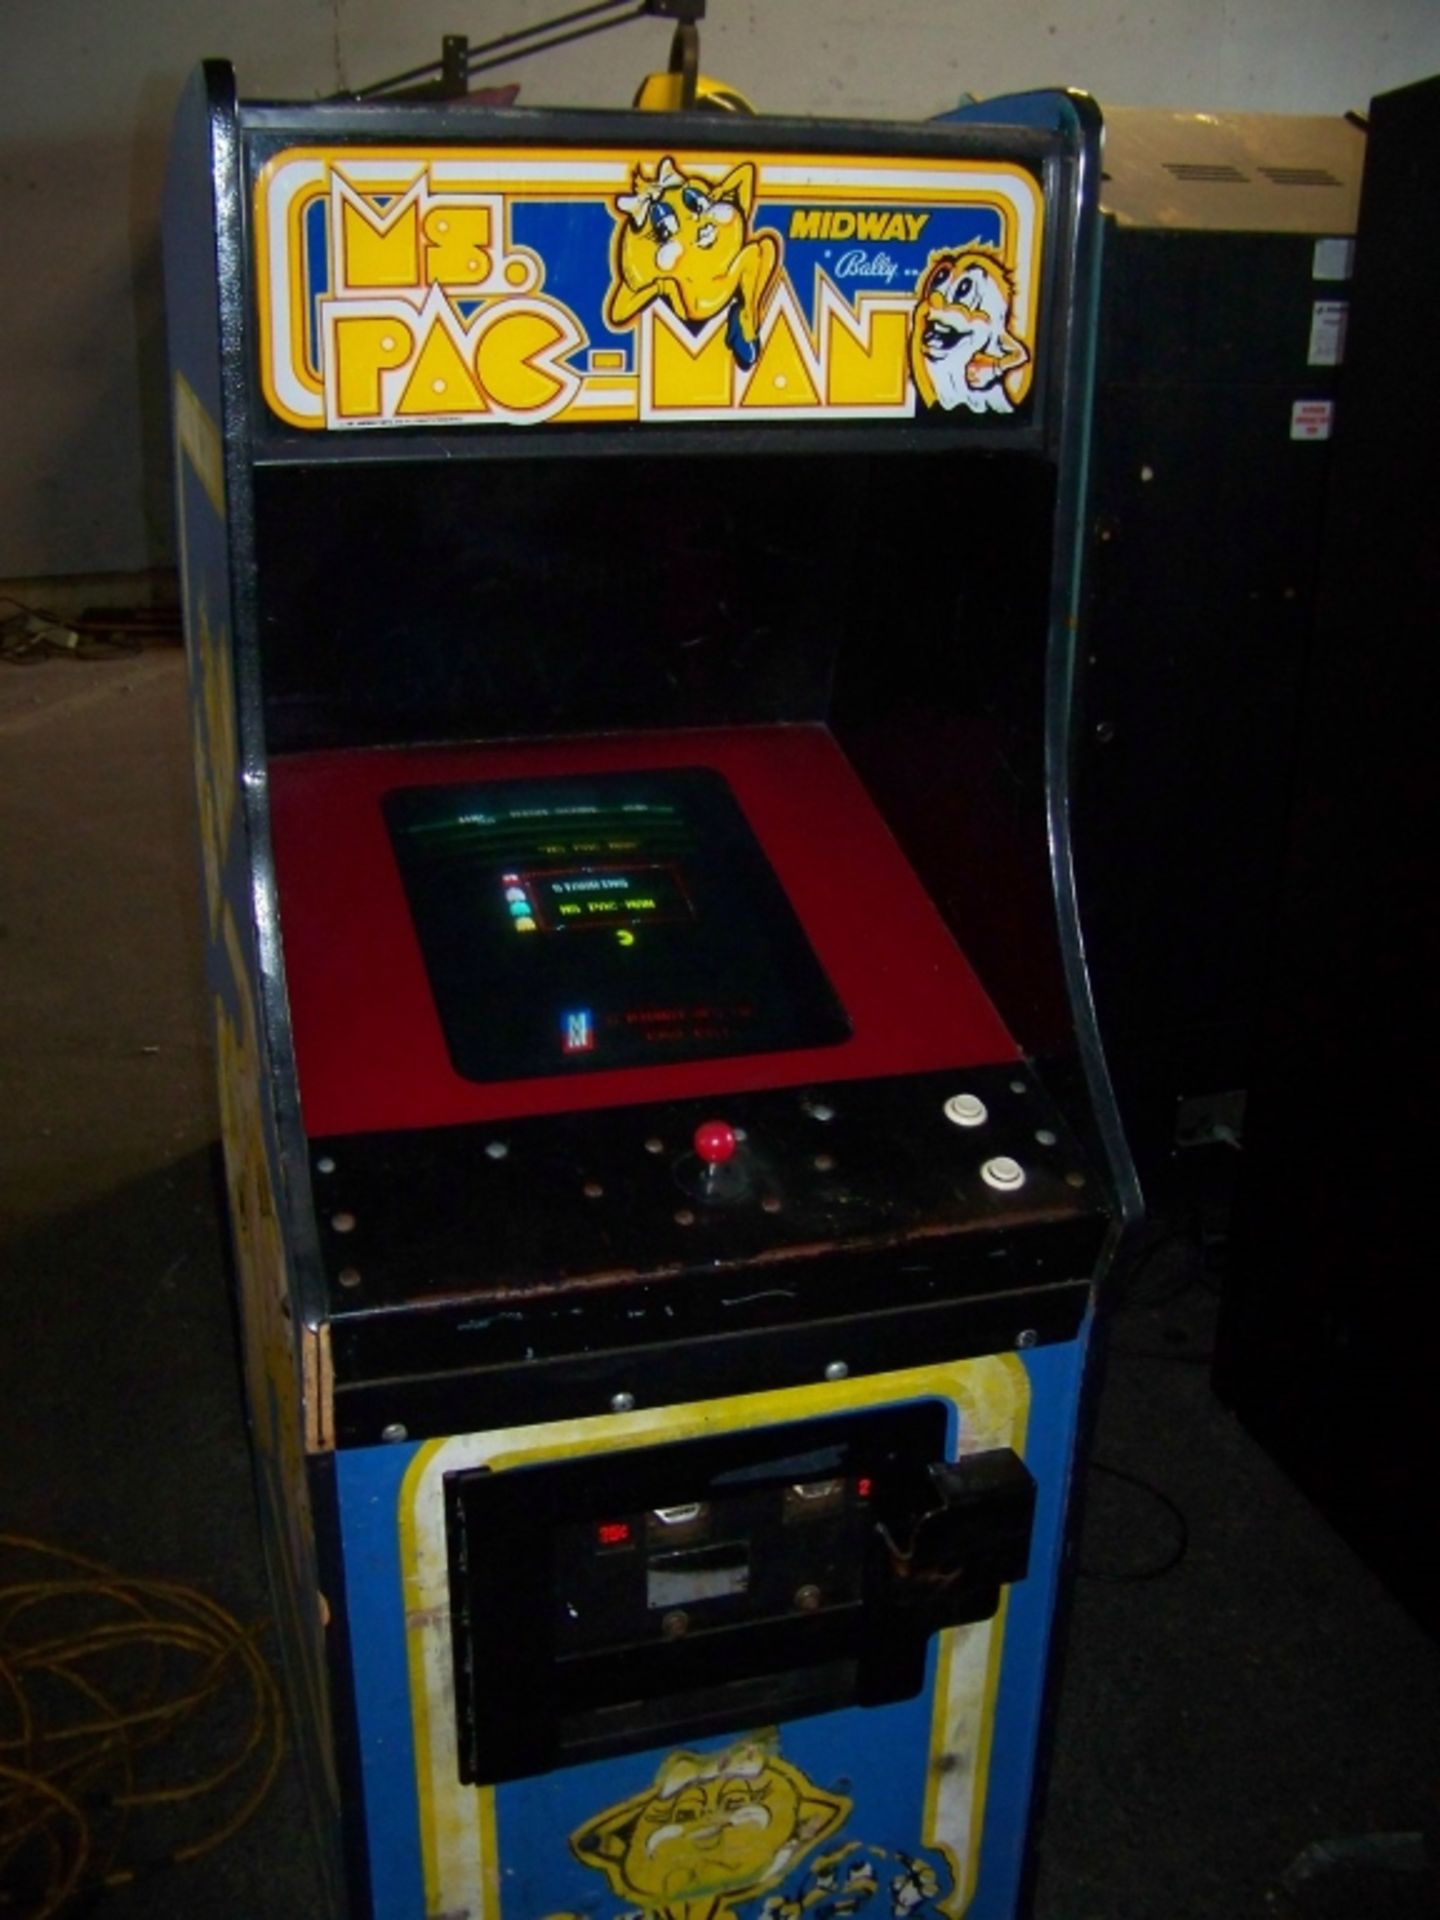 MS PACMAN UPRIGHT ARCADE GAME BALLY MIDWAY - Image 2 of 4